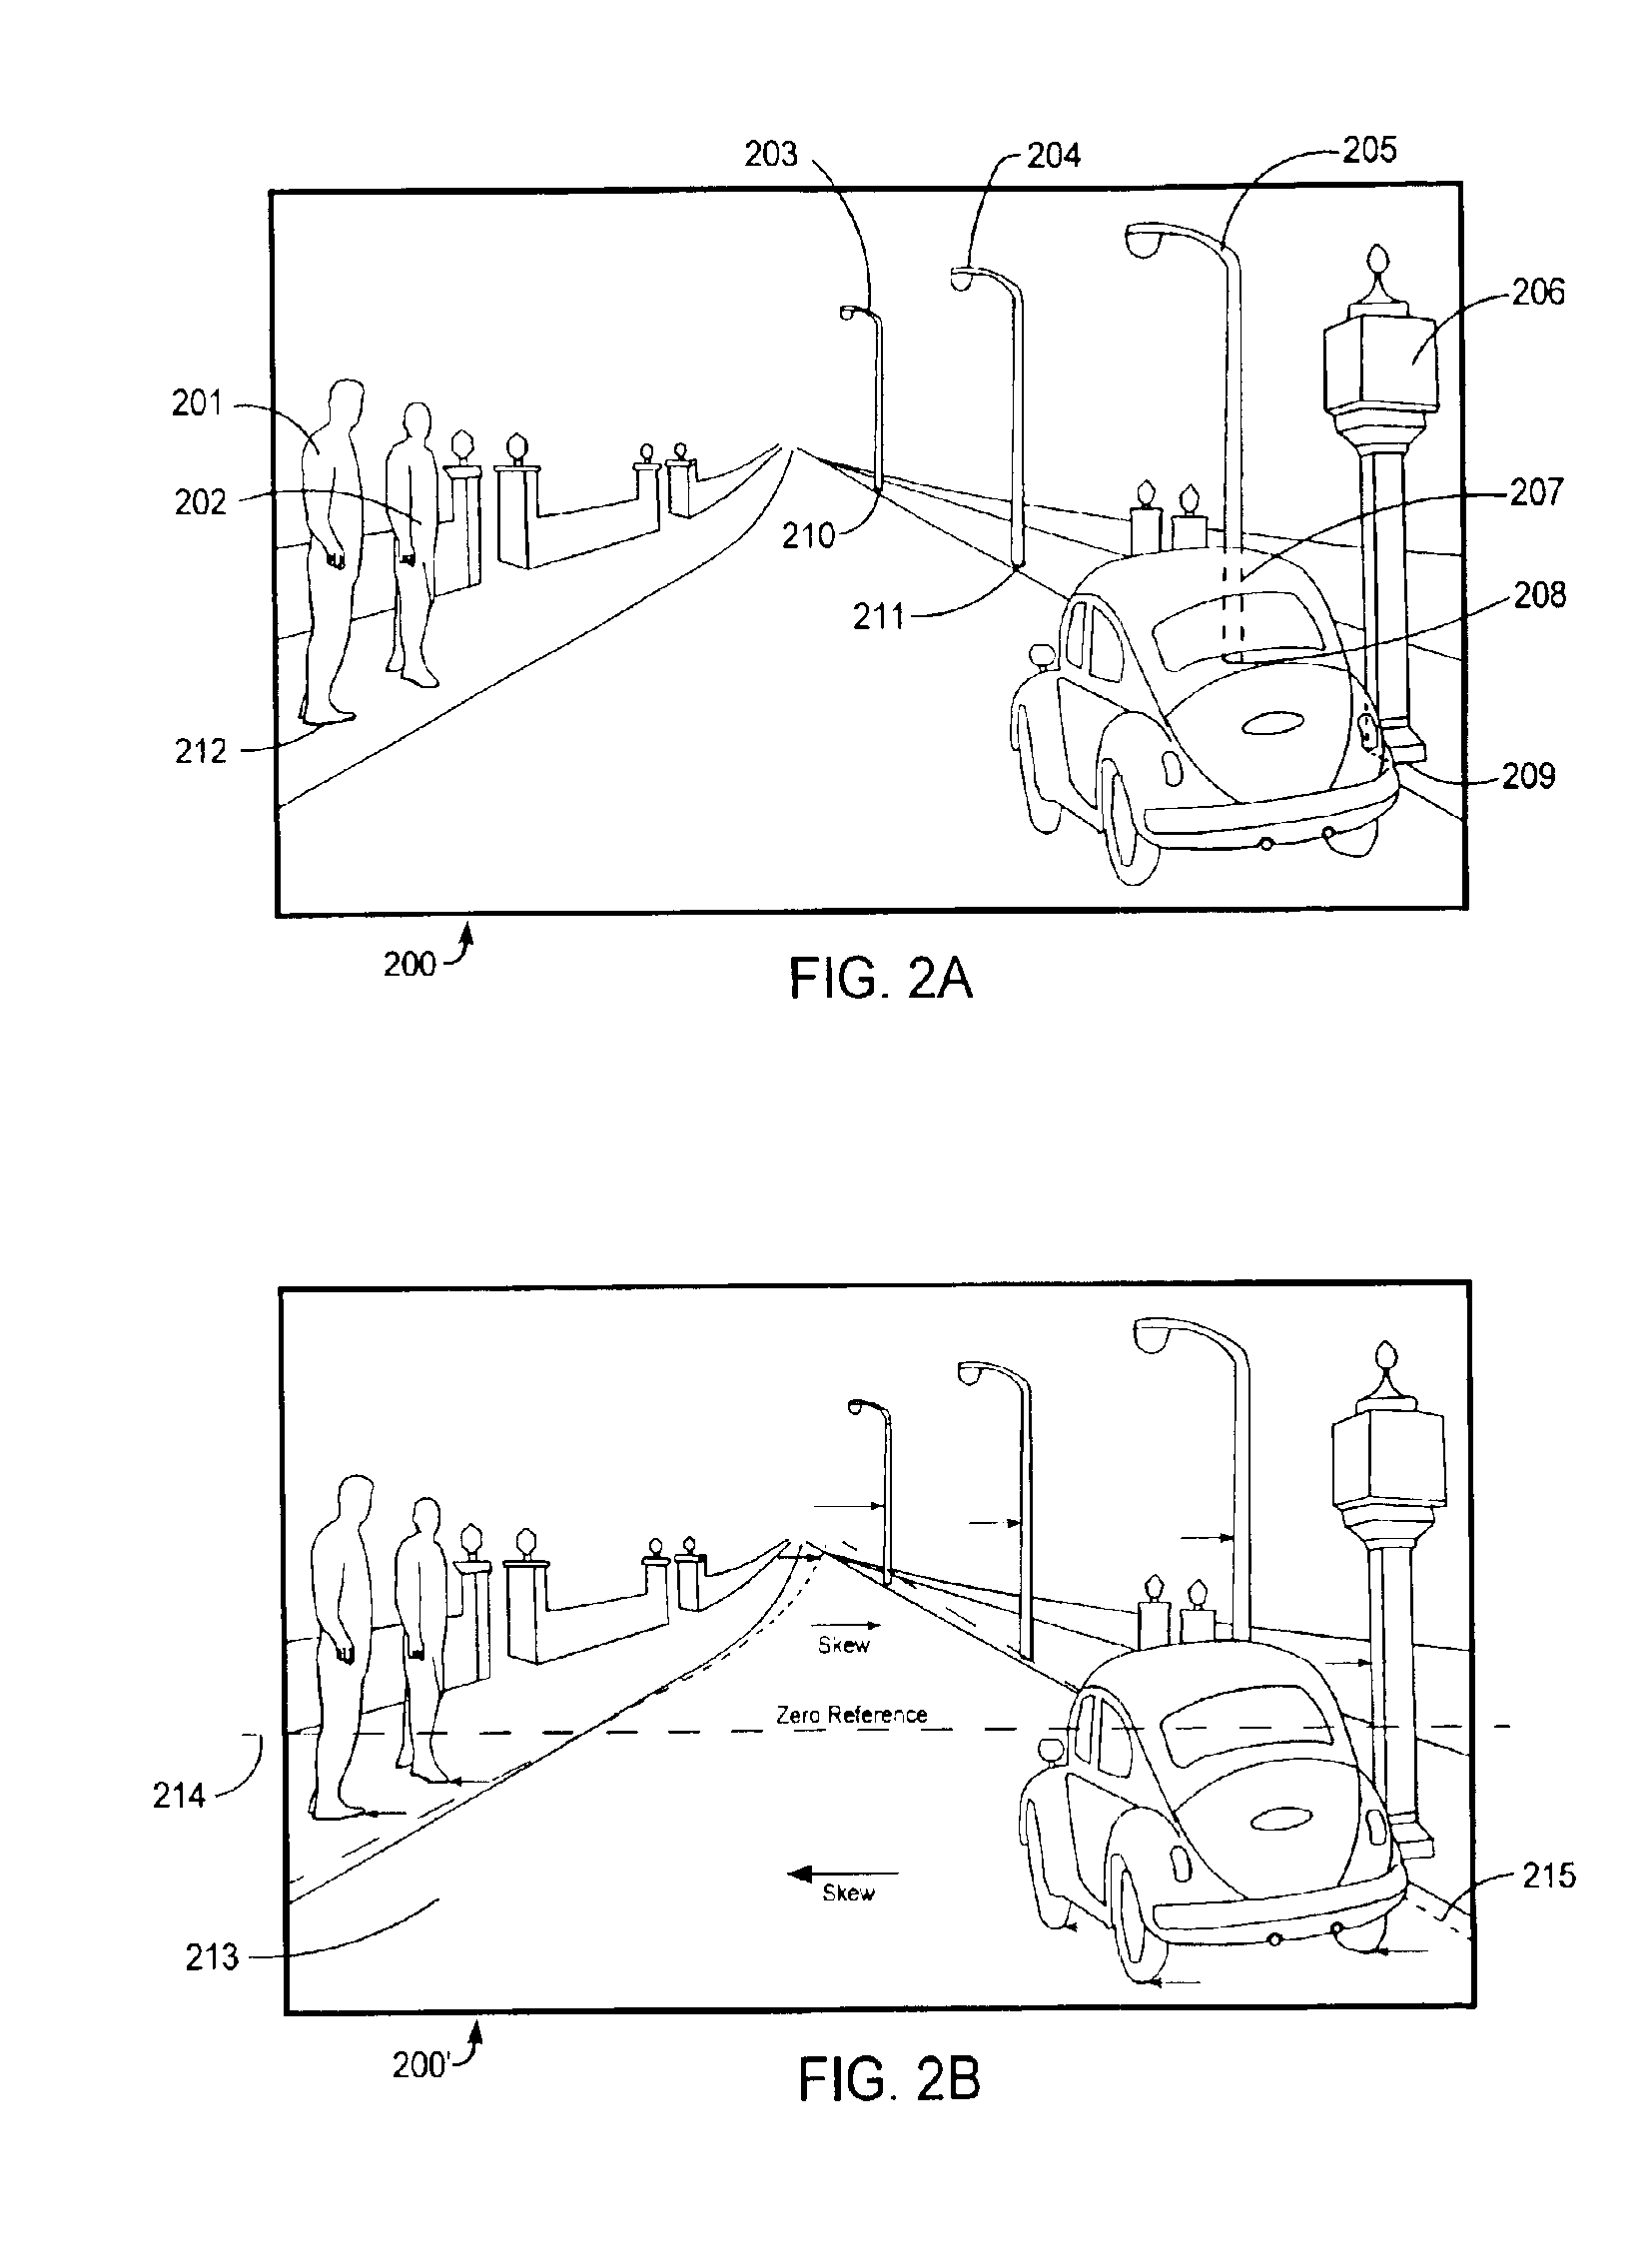 Method for conforming objects to a common depth perspective for converting two-dimensional images into three-dimensional images